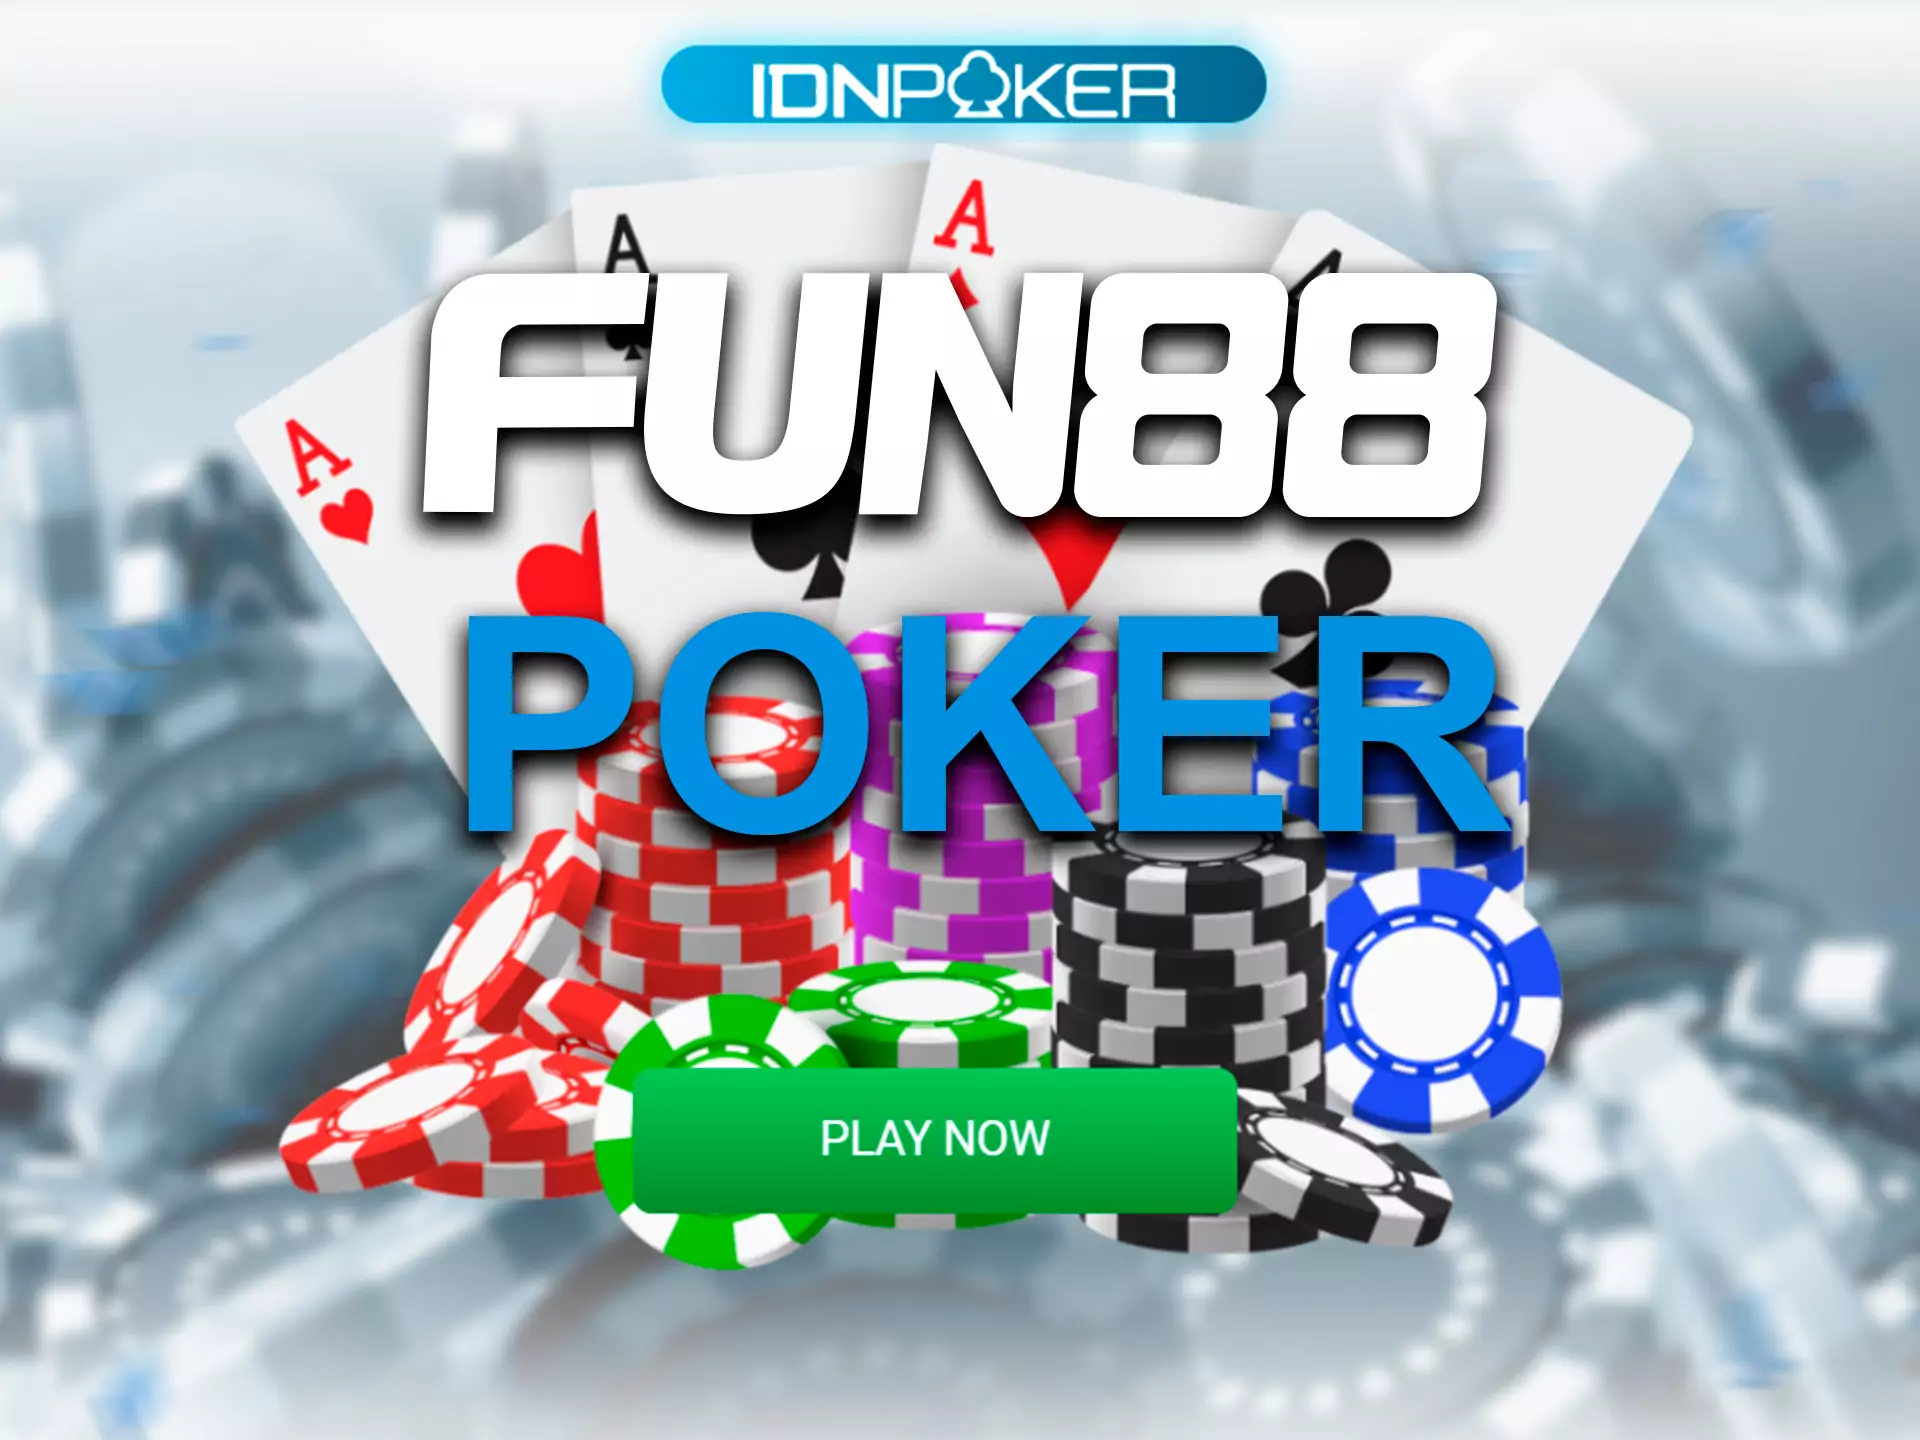 Choose your favorite board game and play poker at Fun88.